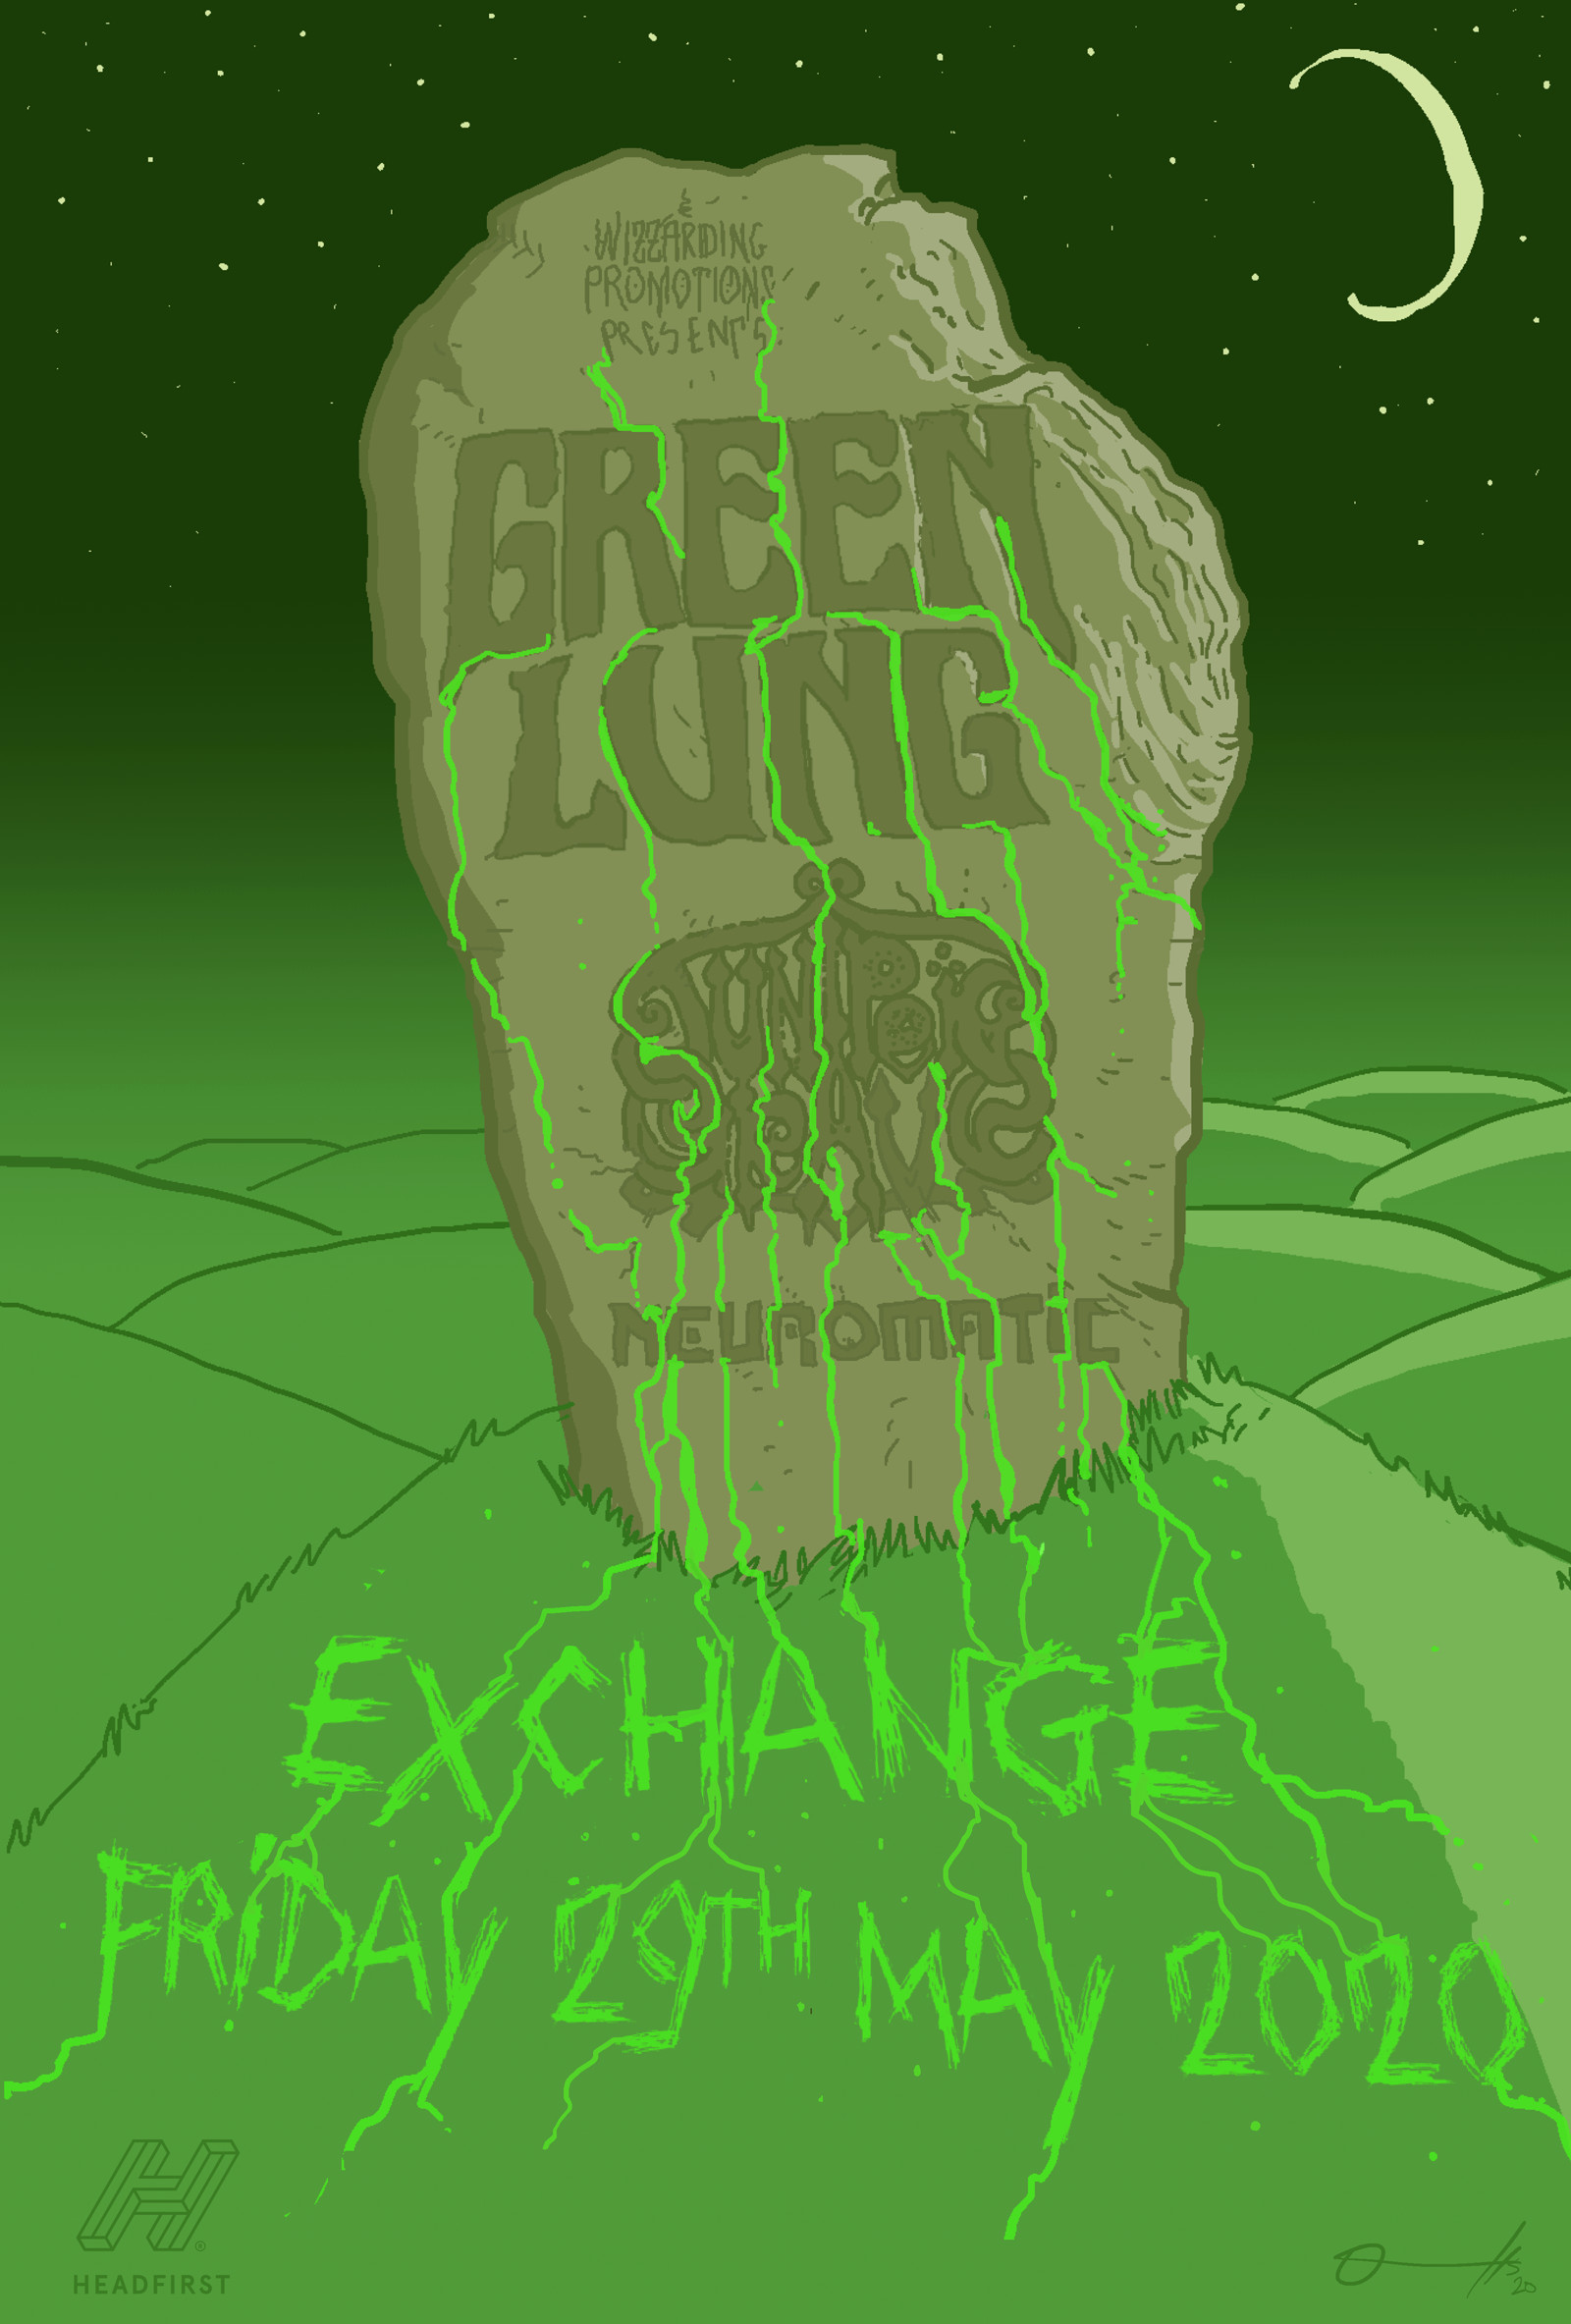 Green Lung + Juniper Grave + Neuromatic at Exchange